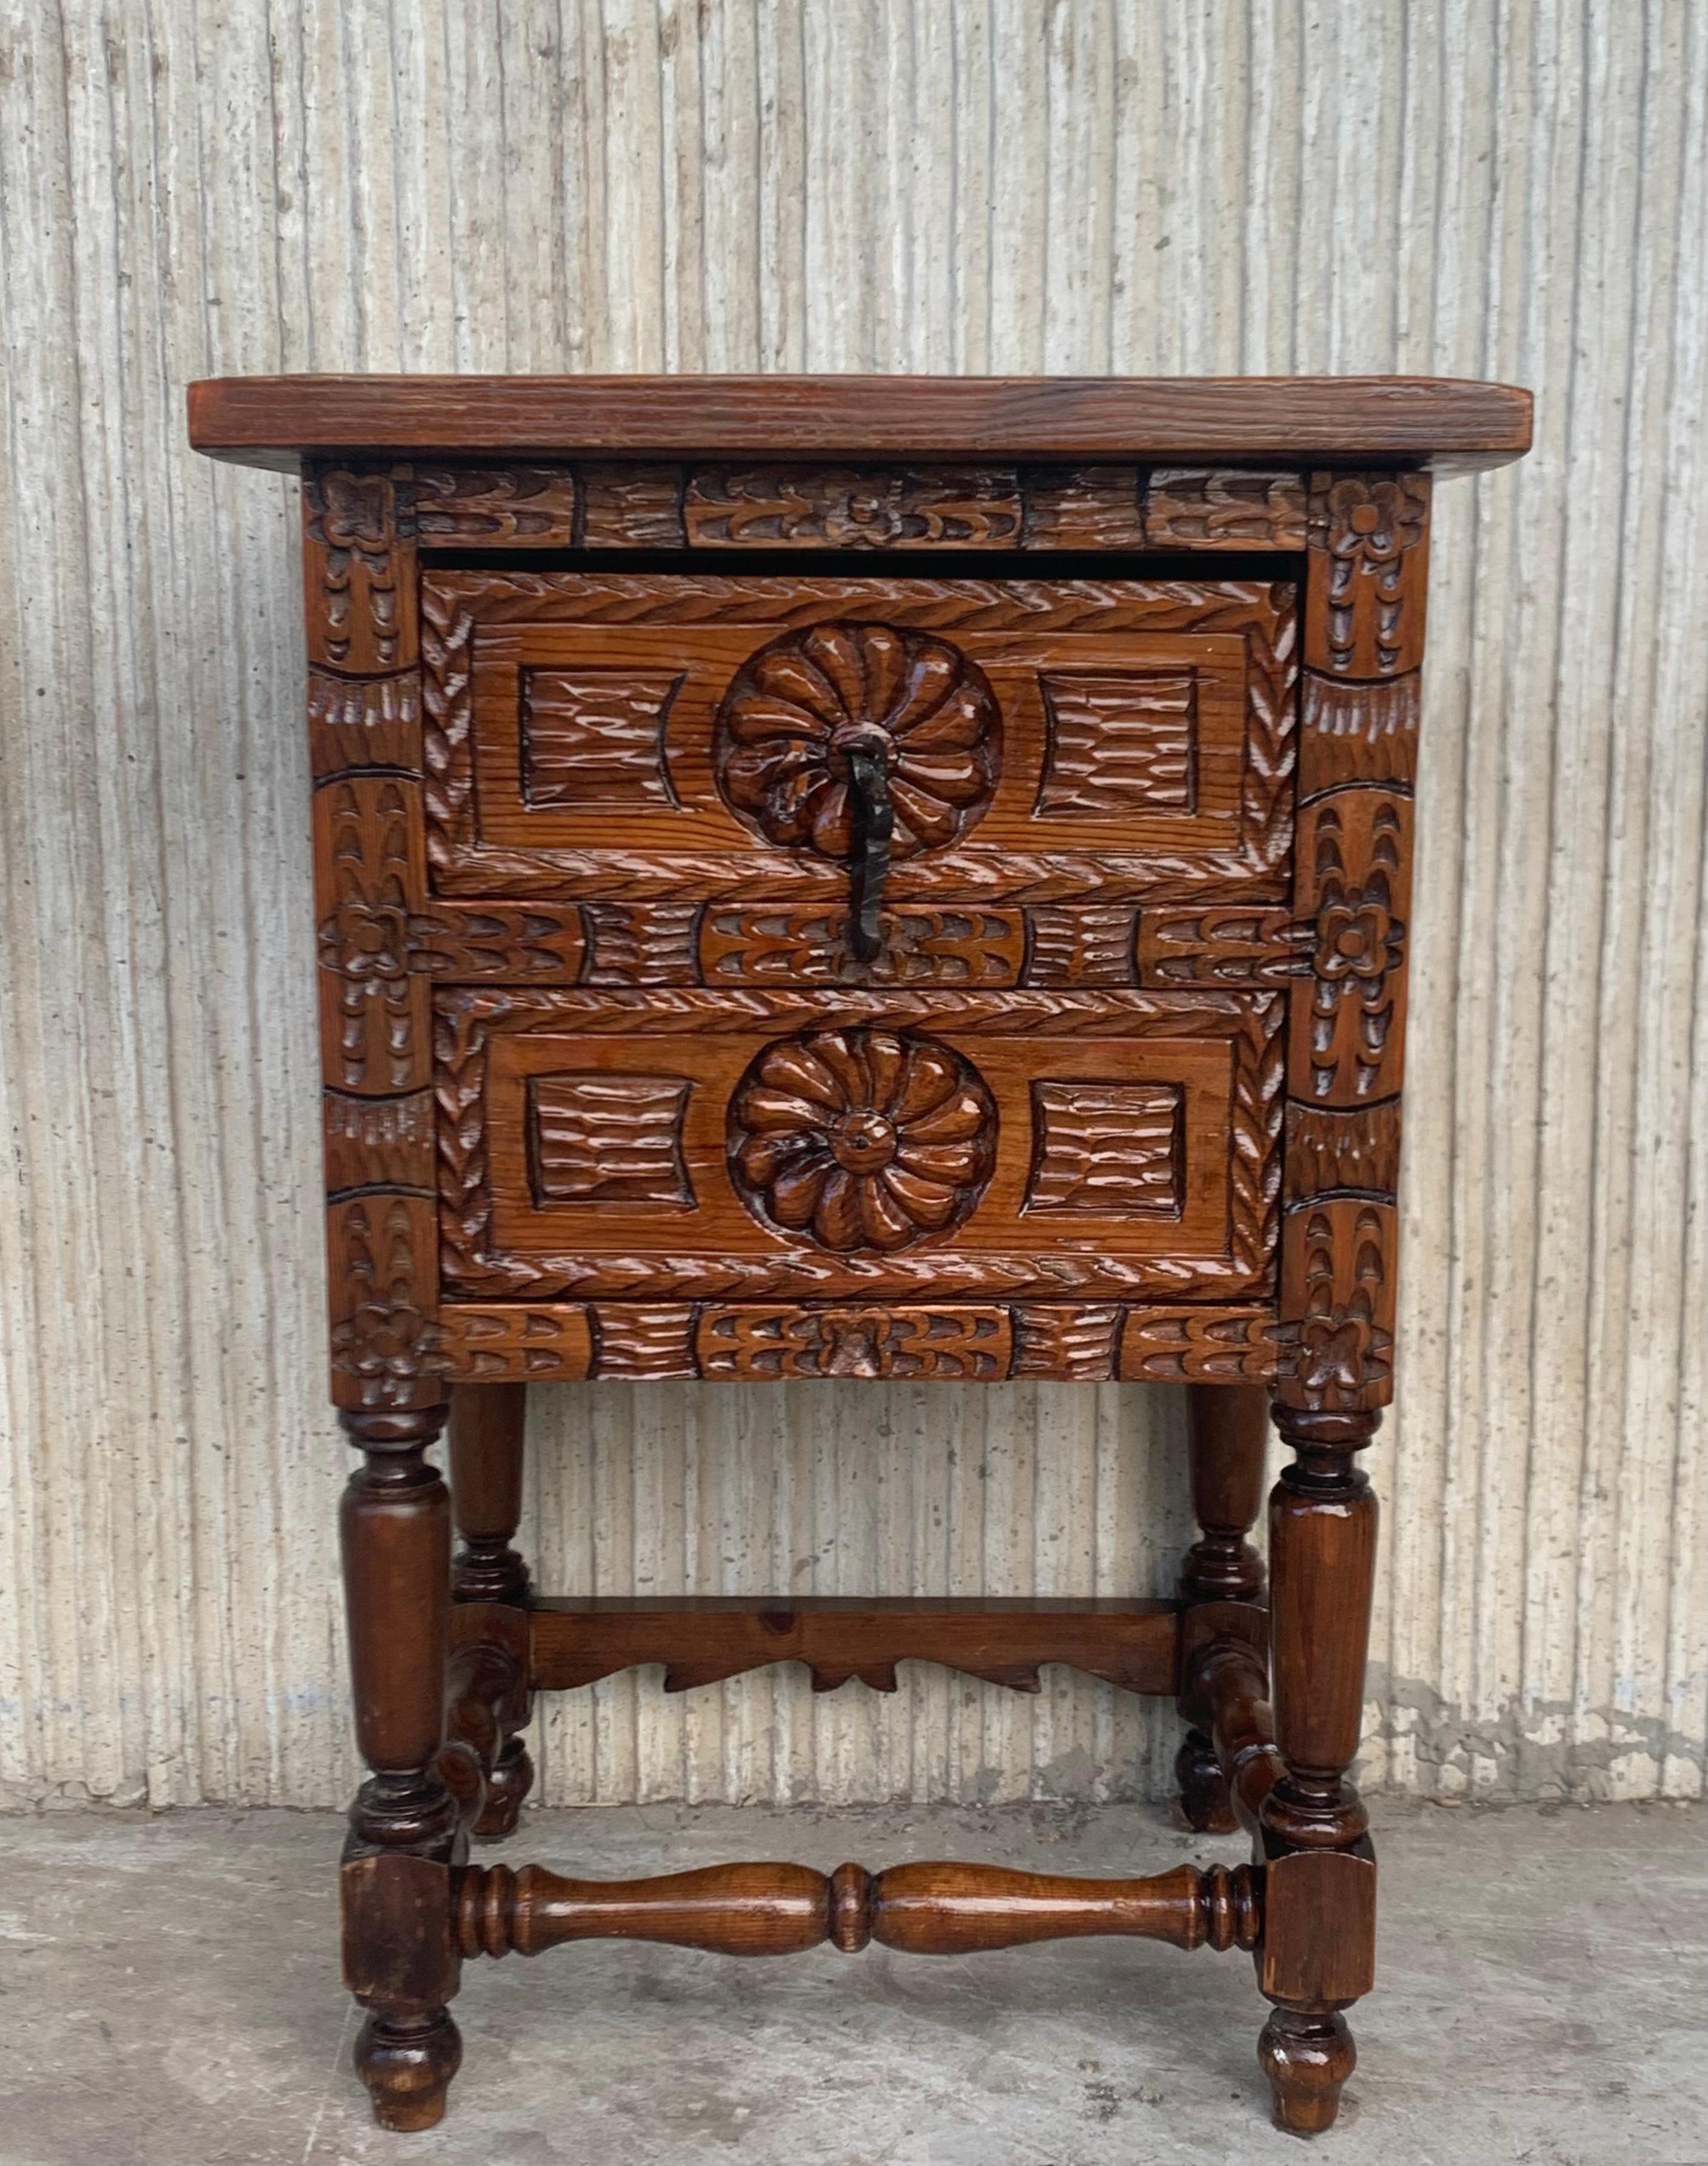 Highly carved late 19th century antique Spanish end table or nightstand with 2 drawers
These versatile tables were very popular, characterized by elaborate Renaissance Revival carvings, this table is extra special and sometimes referred to as a